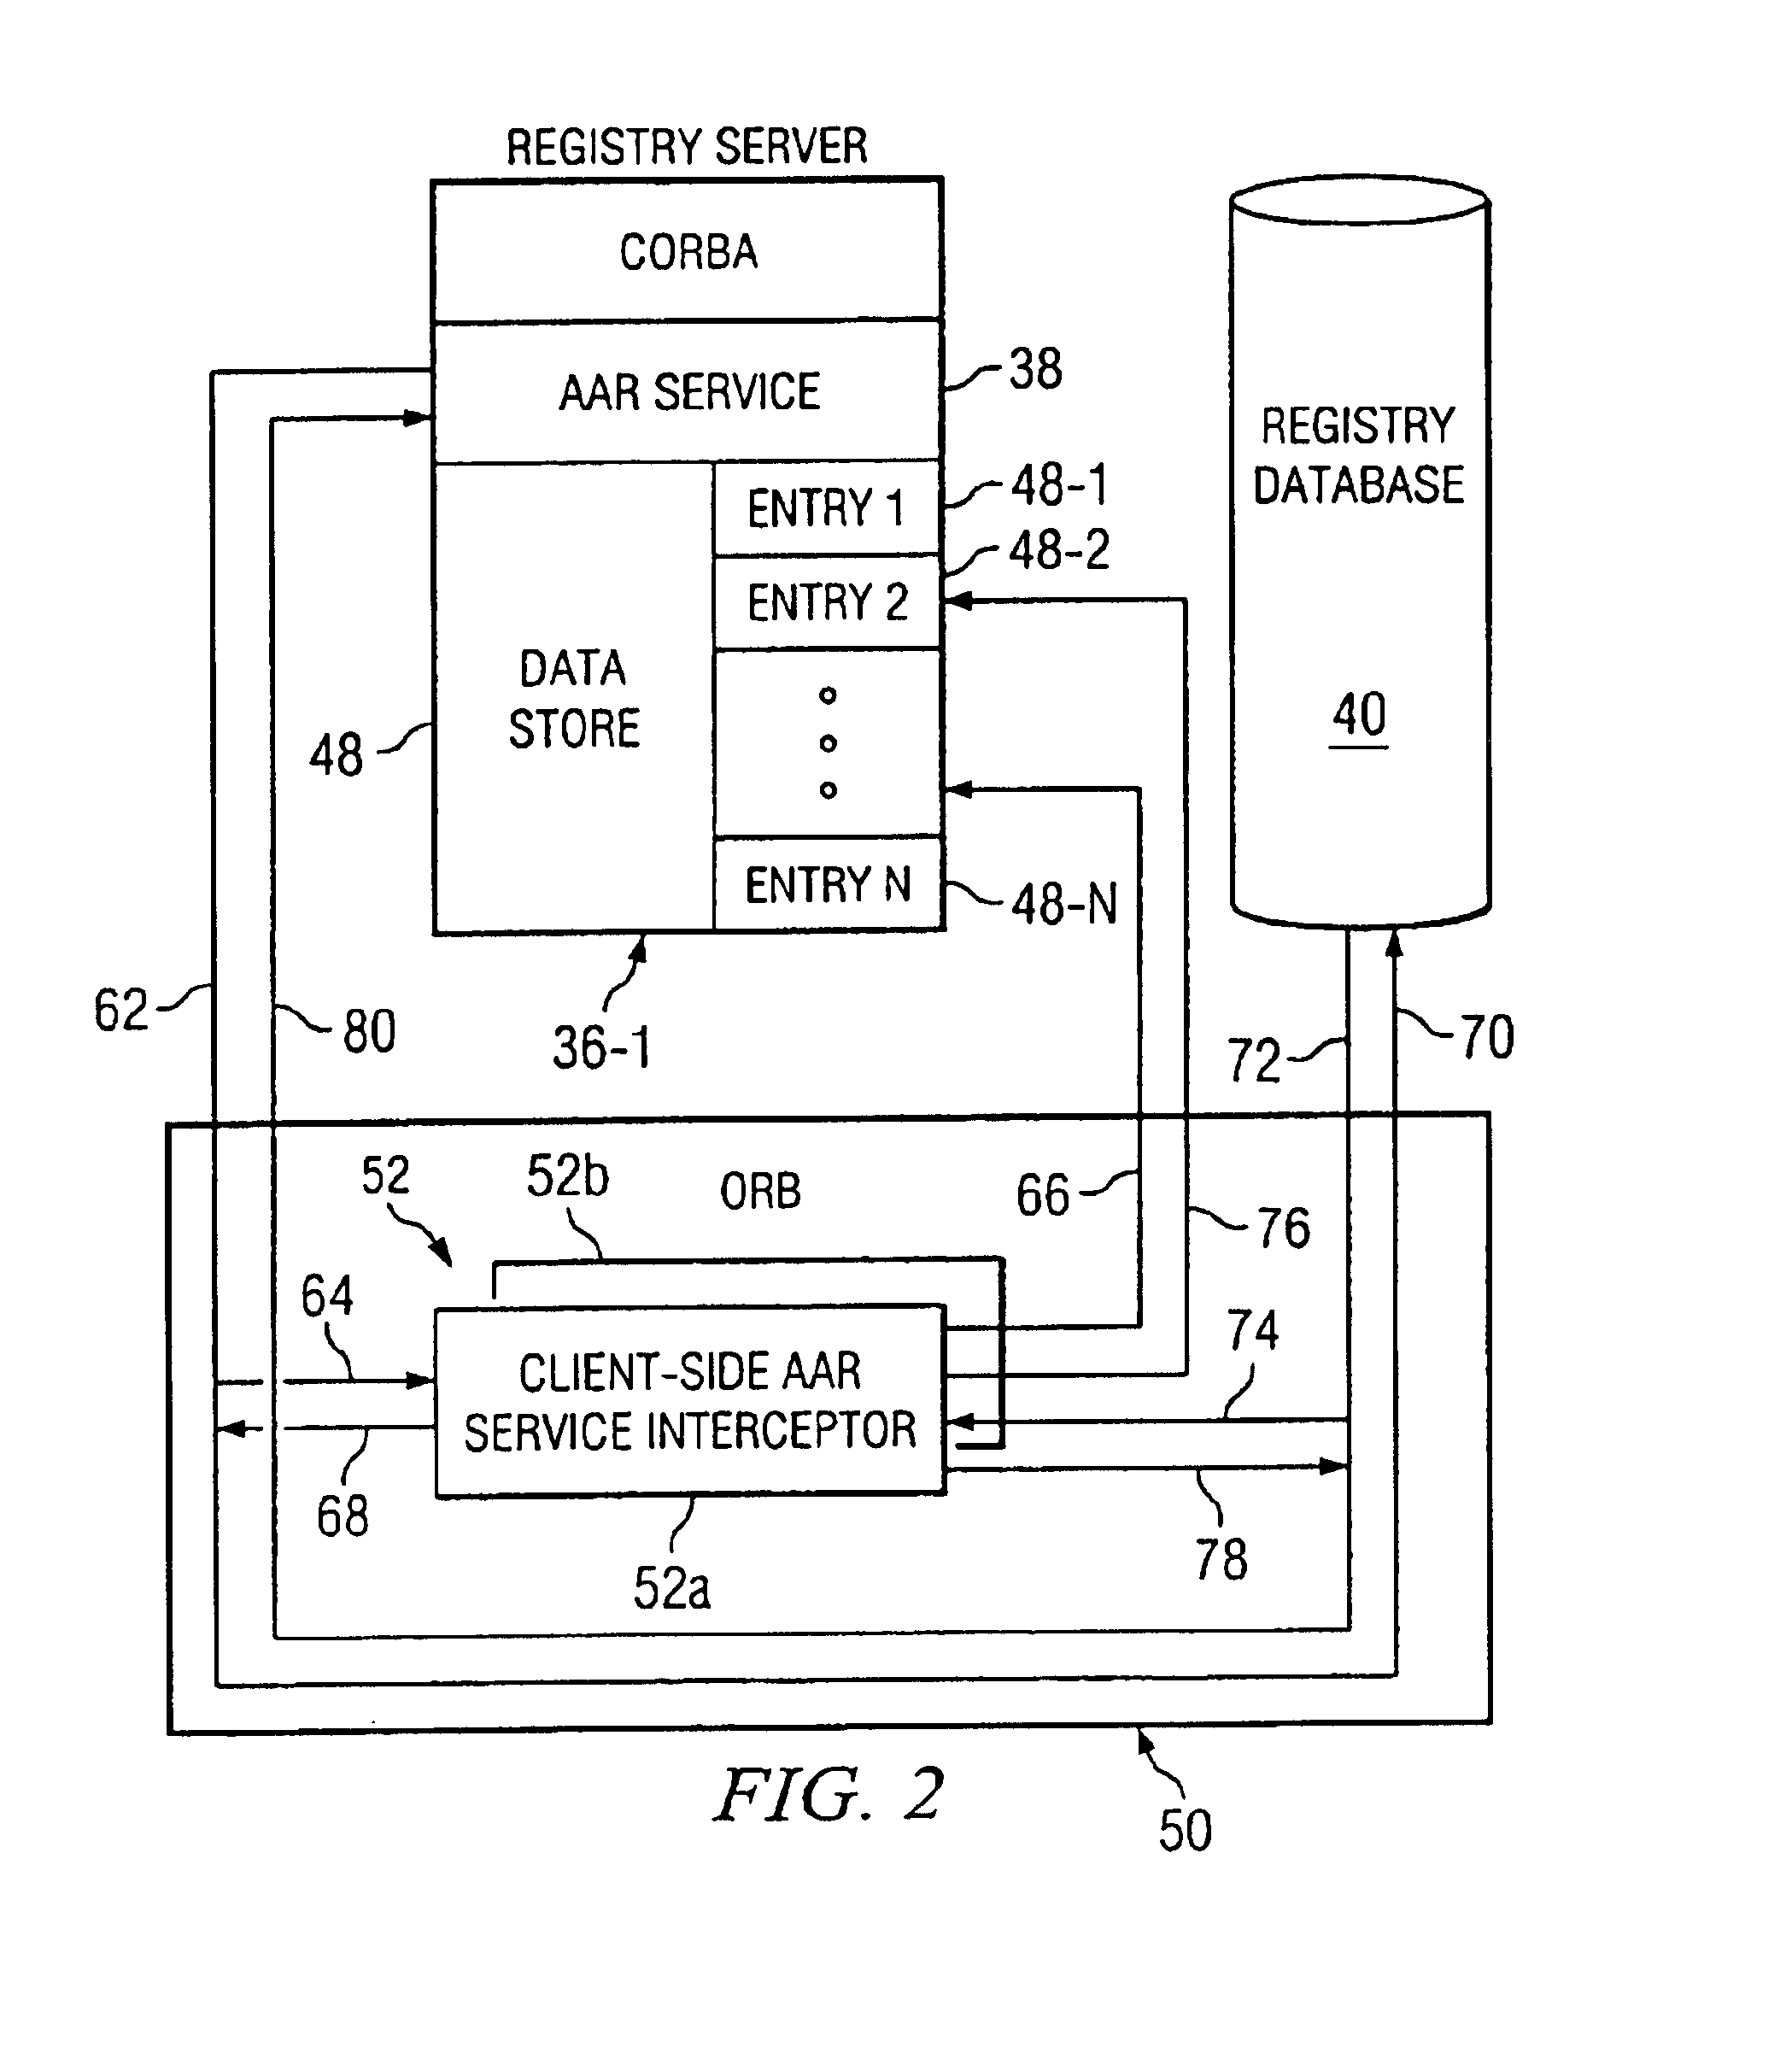 Computer system having an authentication and/or authorization routing service and a CORBA-compliant interceptor for monitoring the same